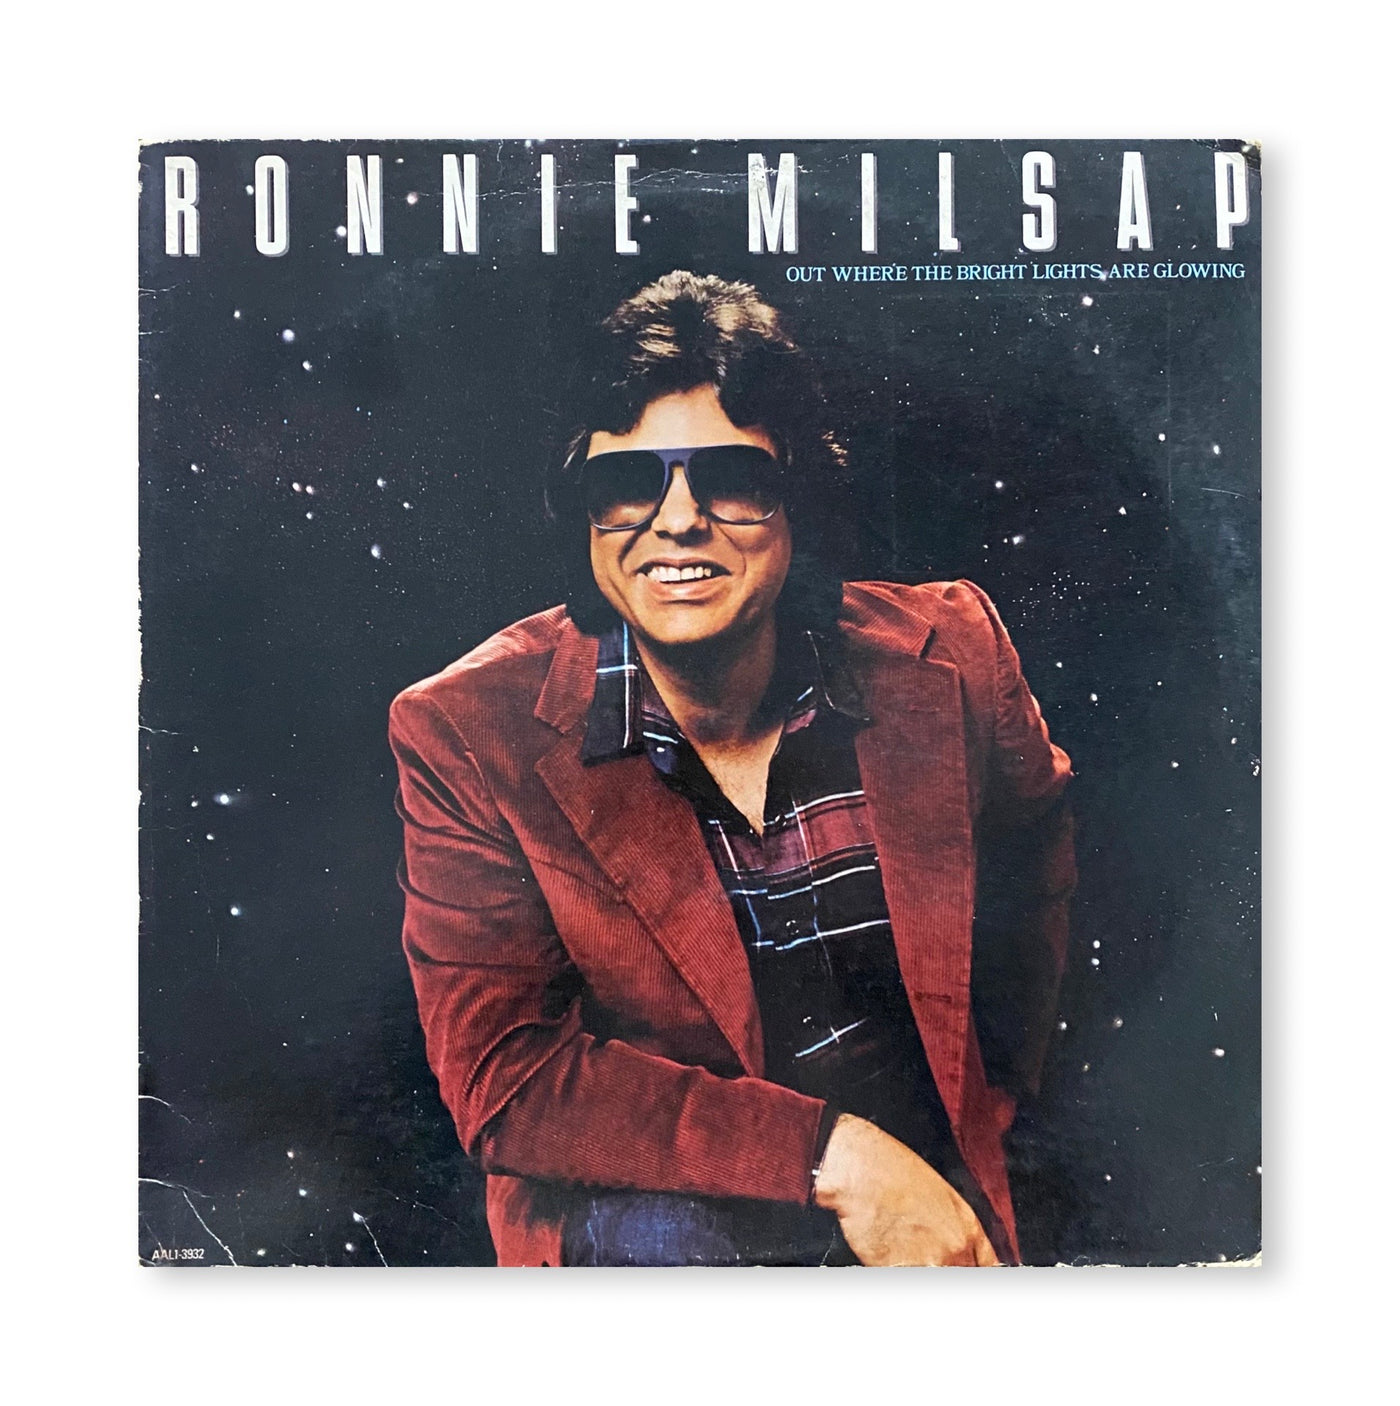 Ronnie Milsap - Out Where The Bright Lights Are Glowing